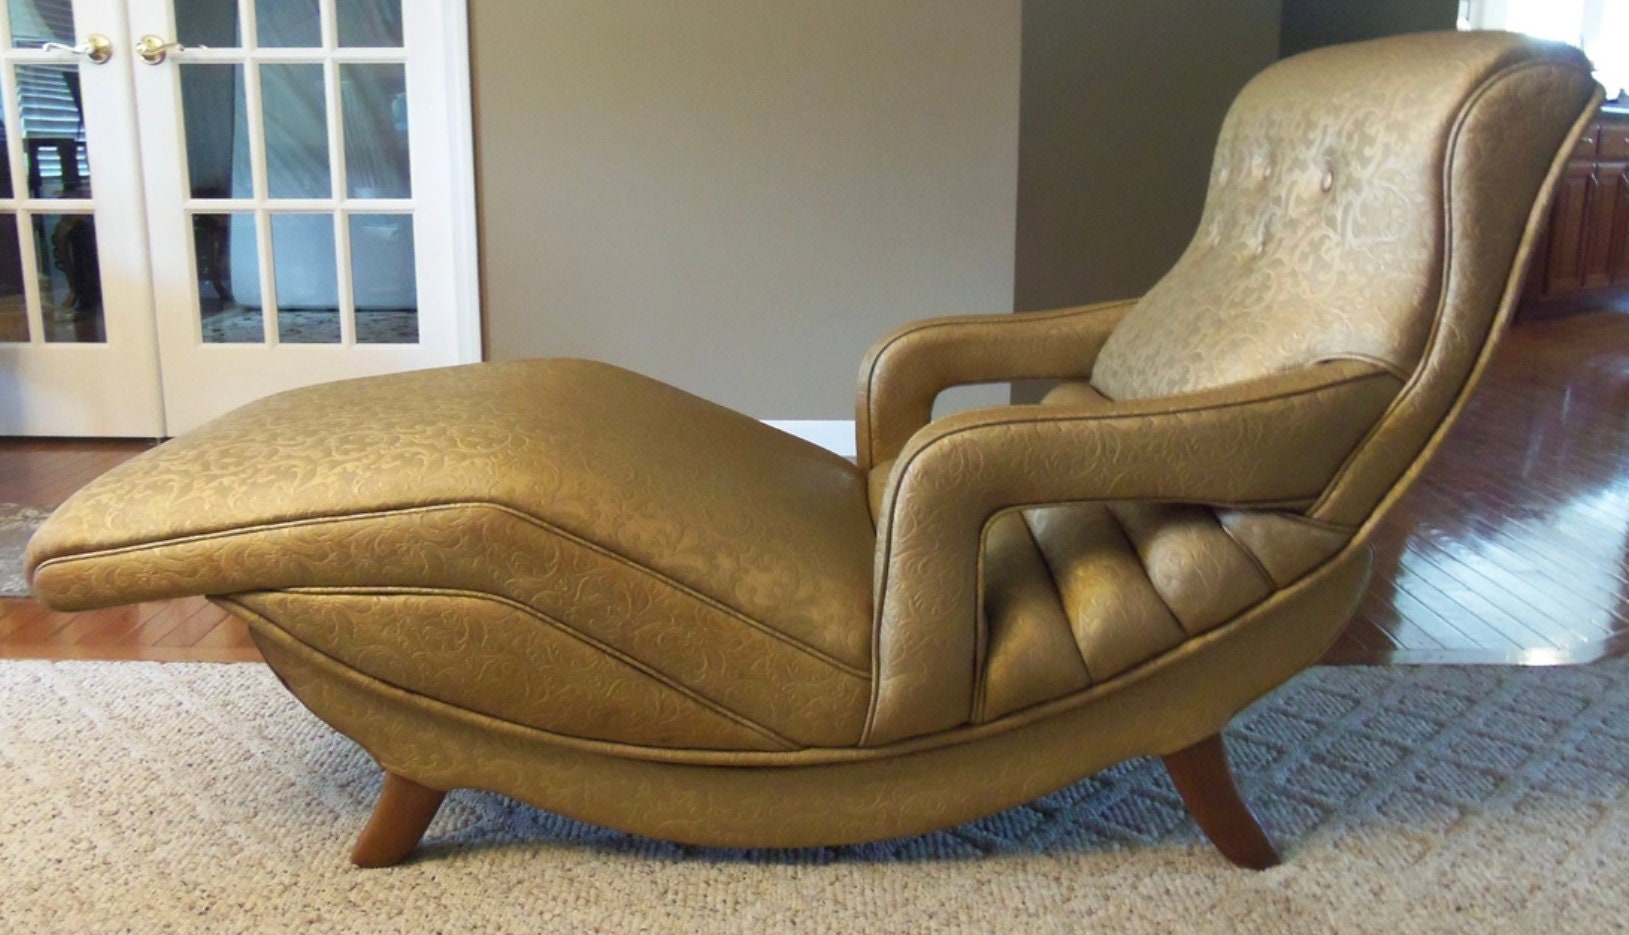 Vintage Contour Cuddle Lounge Chair Retro Rare Hard to Find - Etsy 